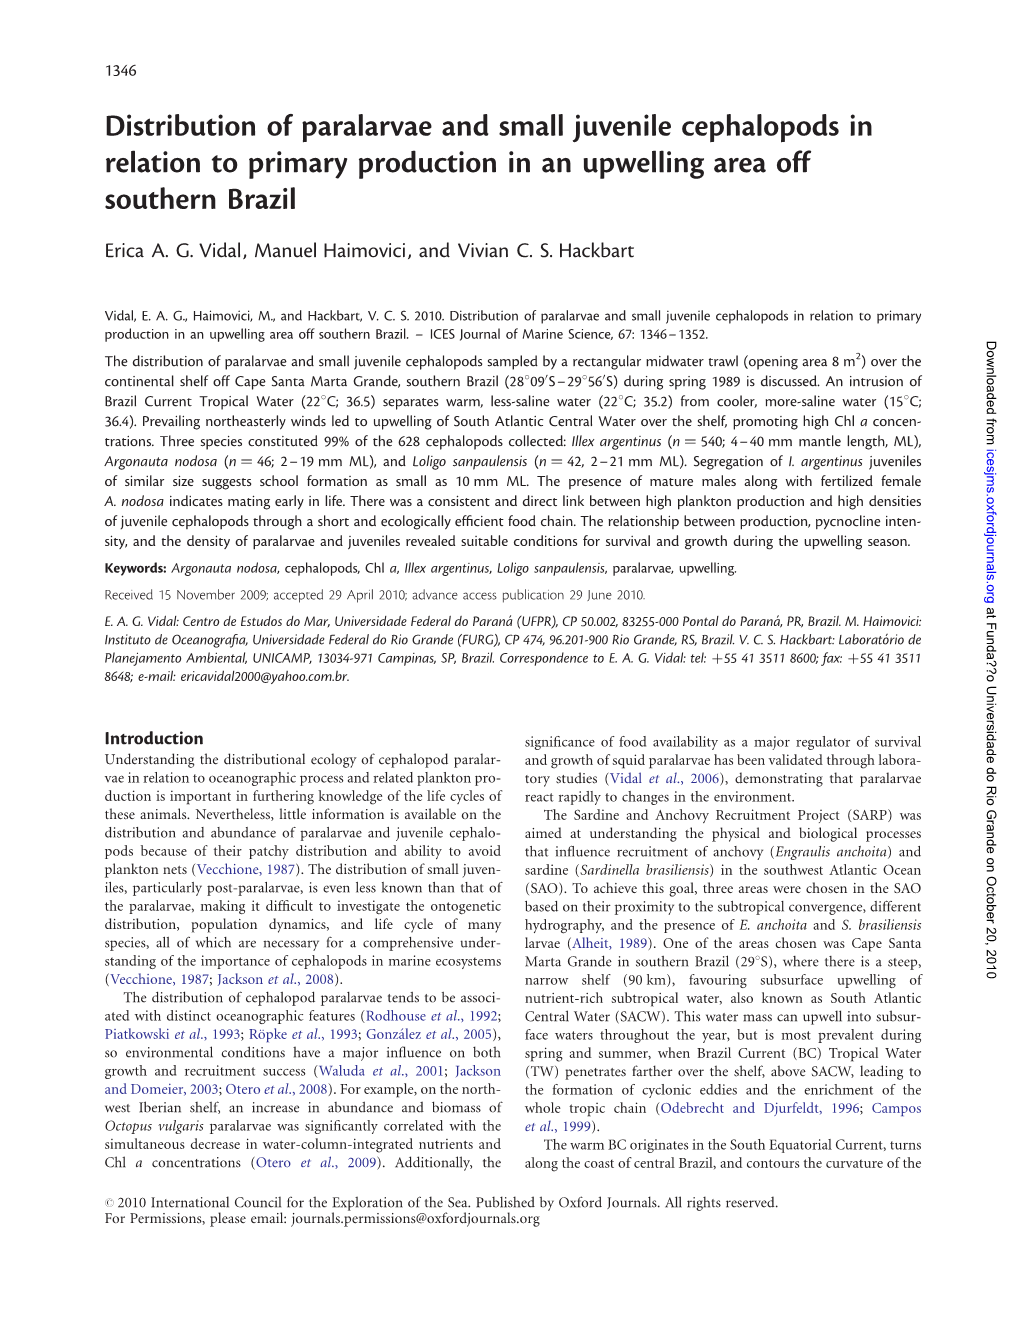 Distribution of Paralarvae and Small Juvenile Cephalopods in Relation to Primary Production in an Upwelling Area Off Southern Brazil